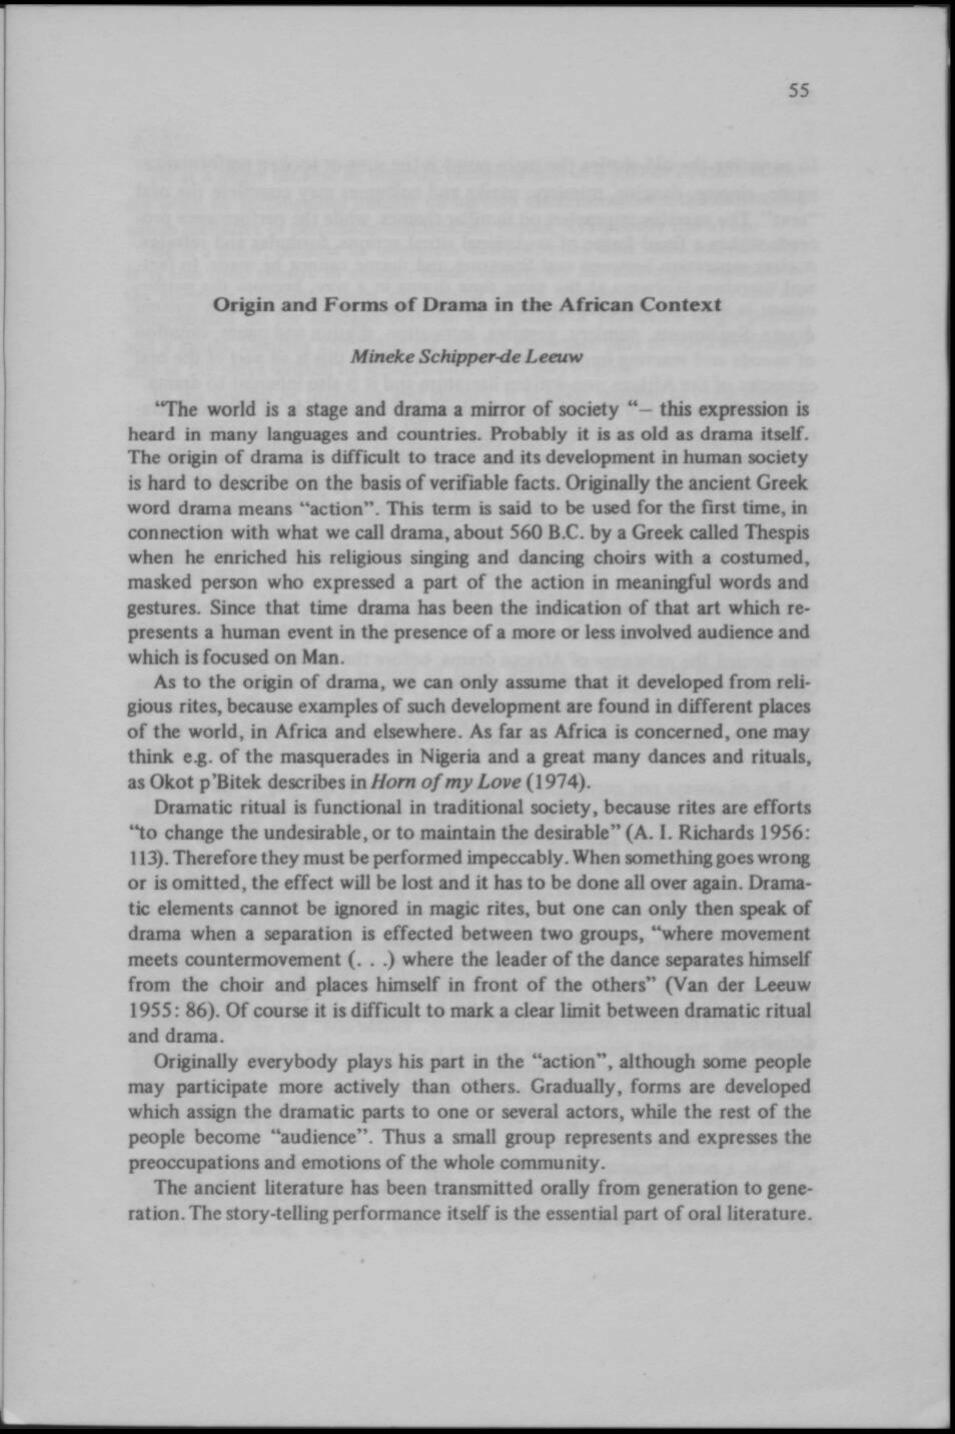 Origins and forms of Drama in African Context